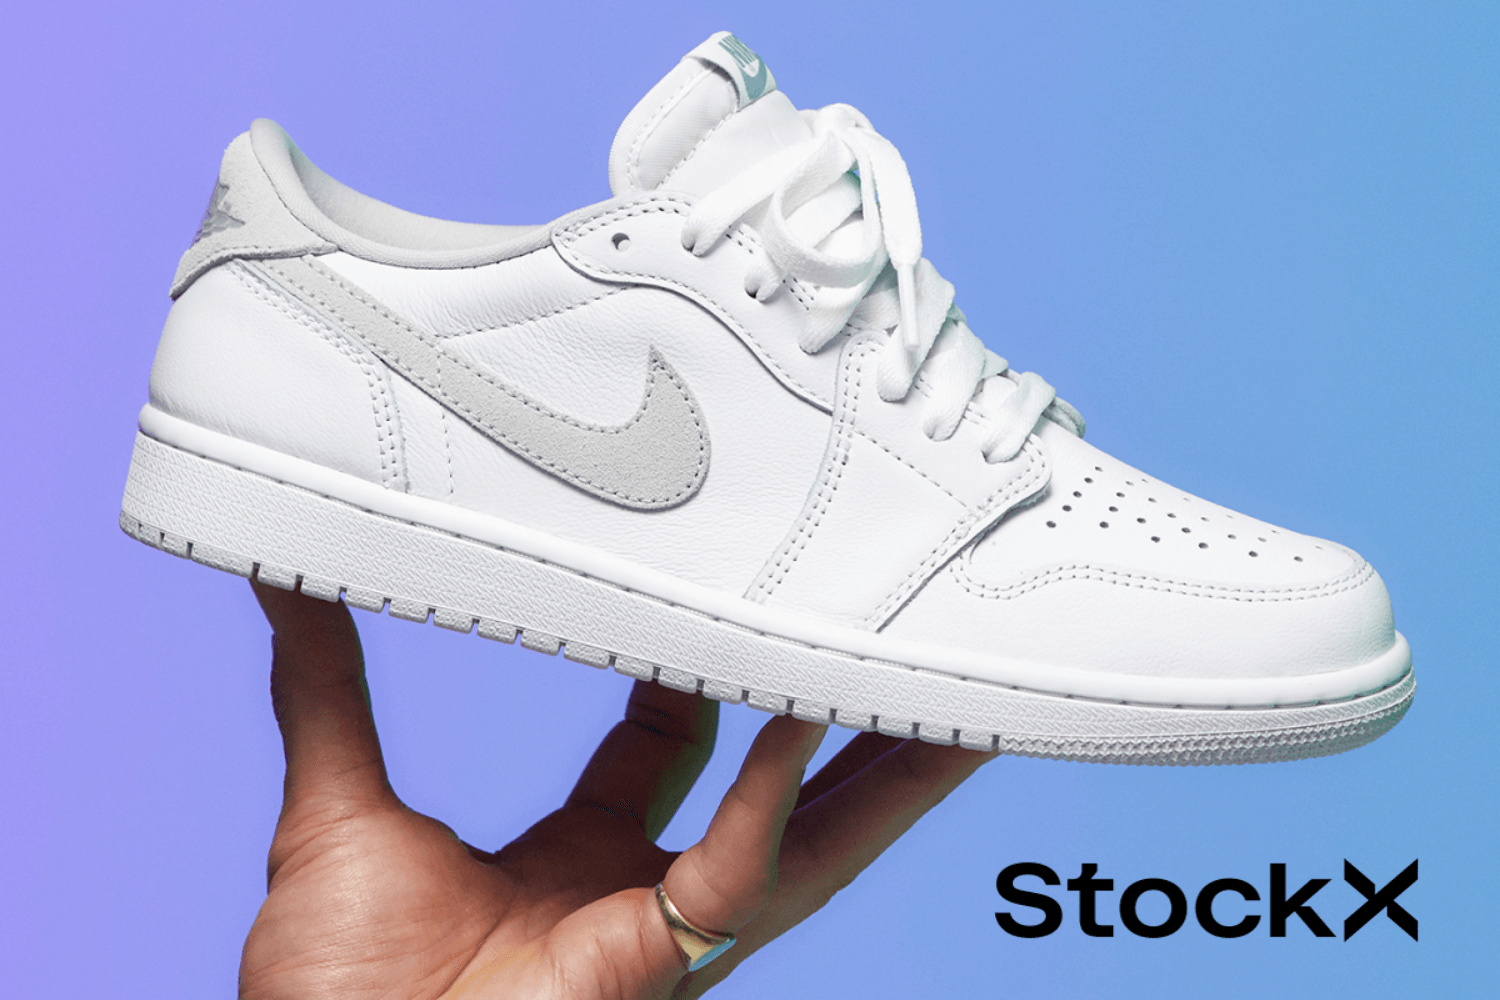 The best classics under €200 at StockX